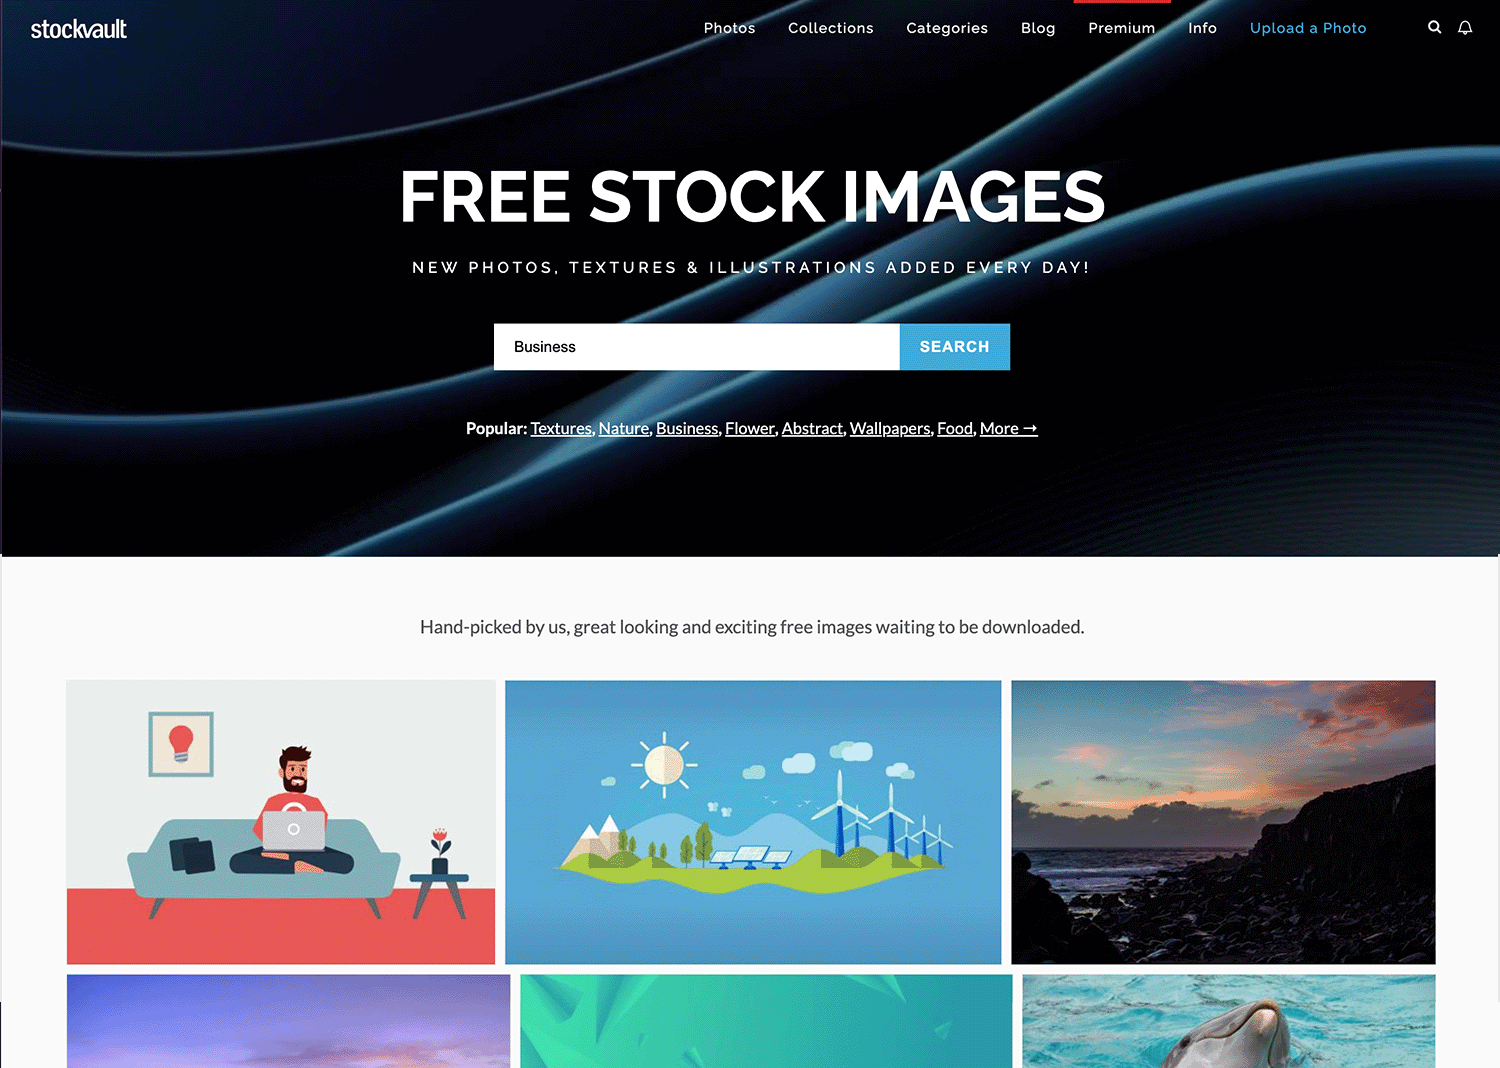 Stockvault homepage showcasing free stock images, textures, illustrations, and vectors